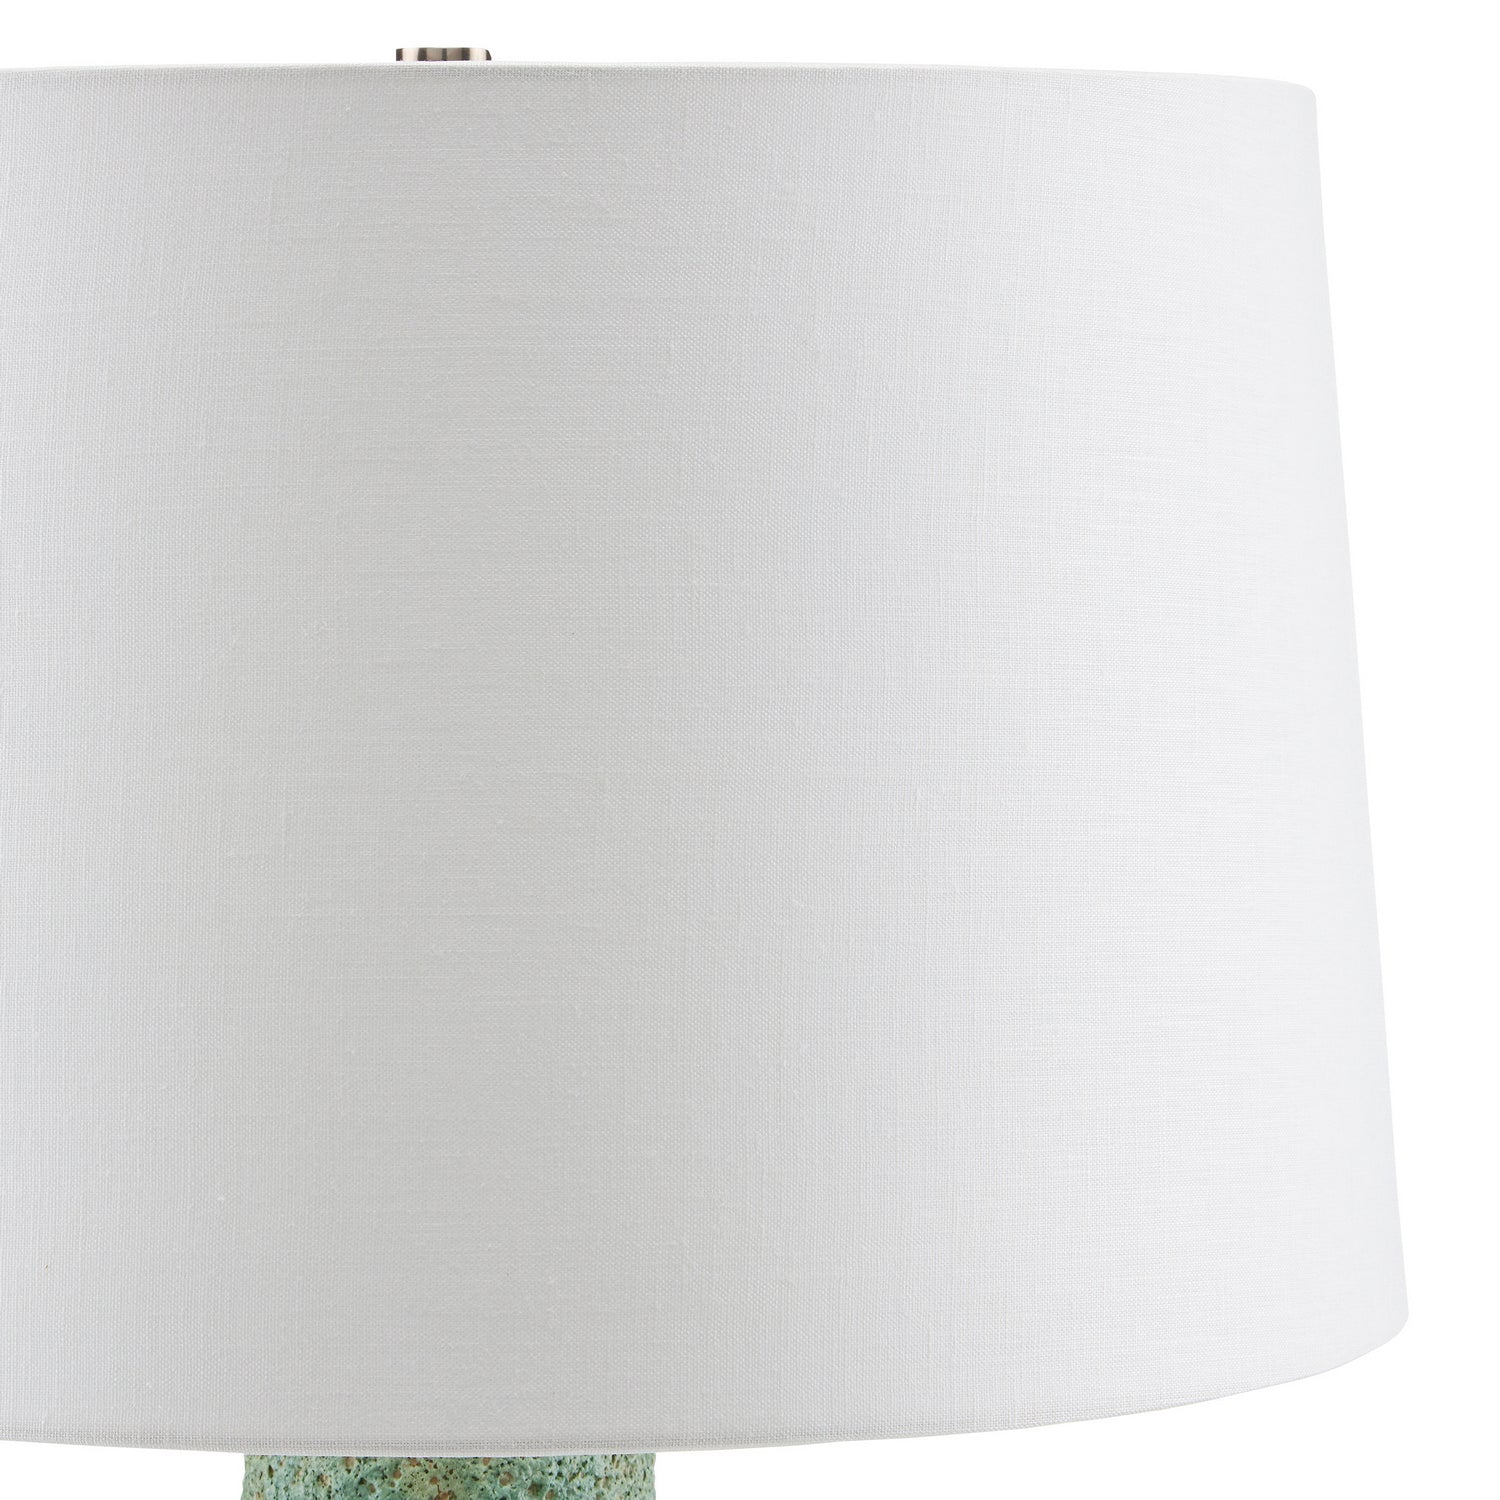 One Light Table Lamp from the Manor collection in Moss Green finish